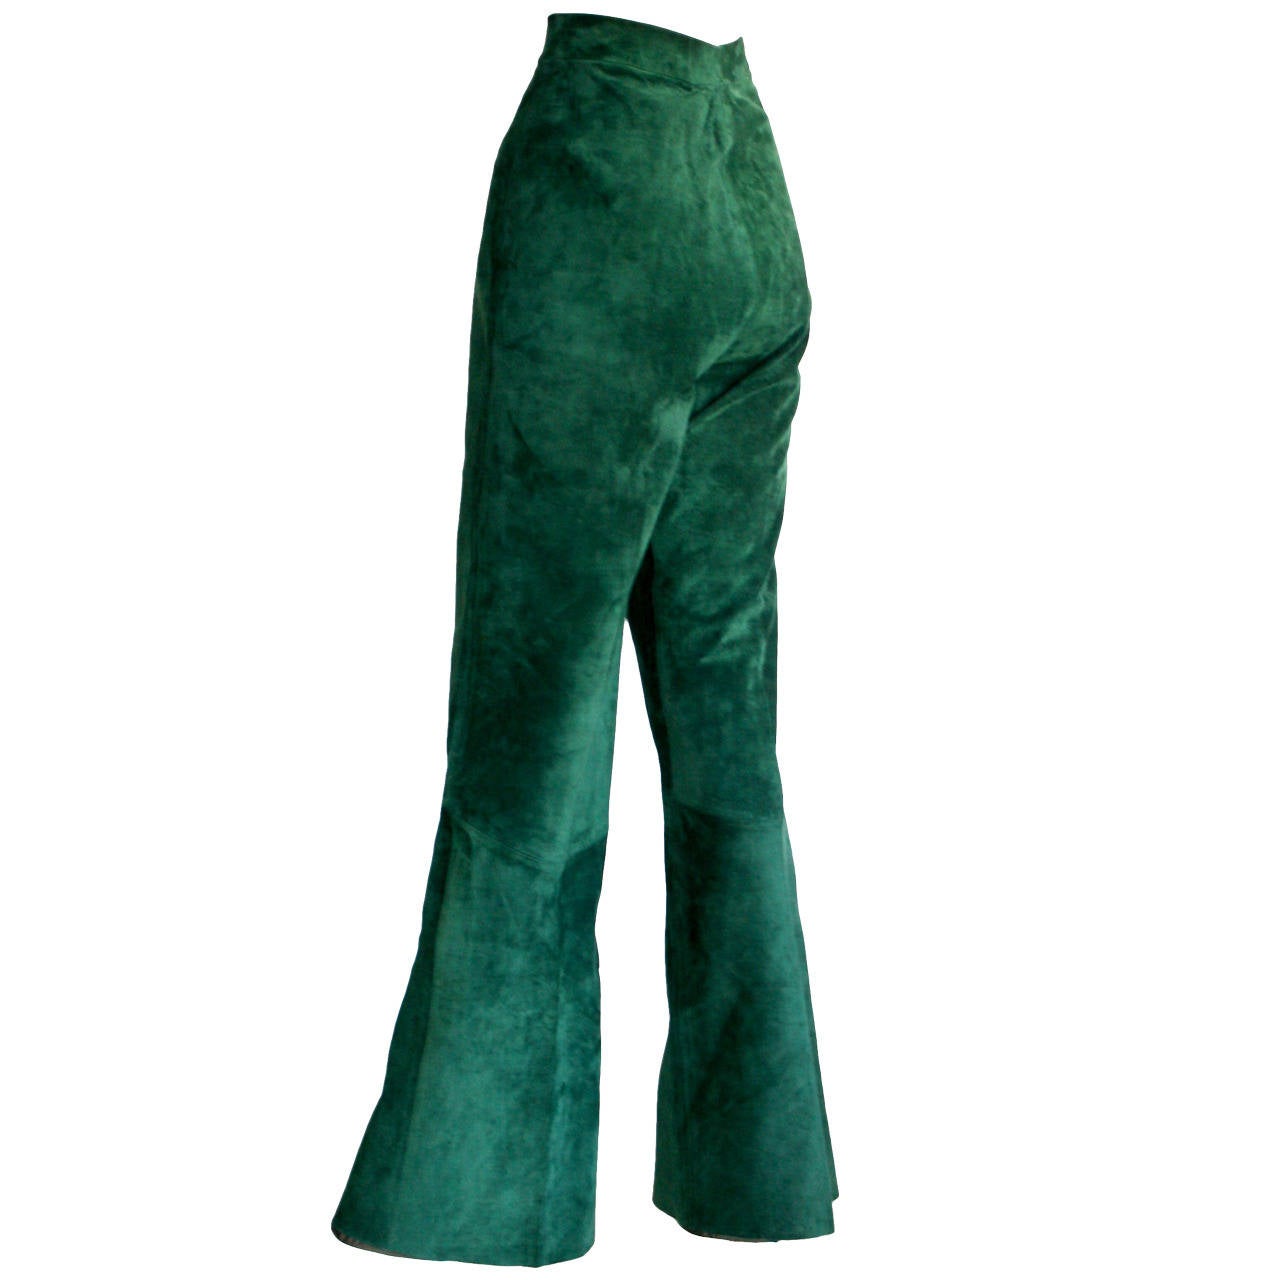 RARE Vintage Gucci Suede Leather Green High Waisted Bell Bottoms